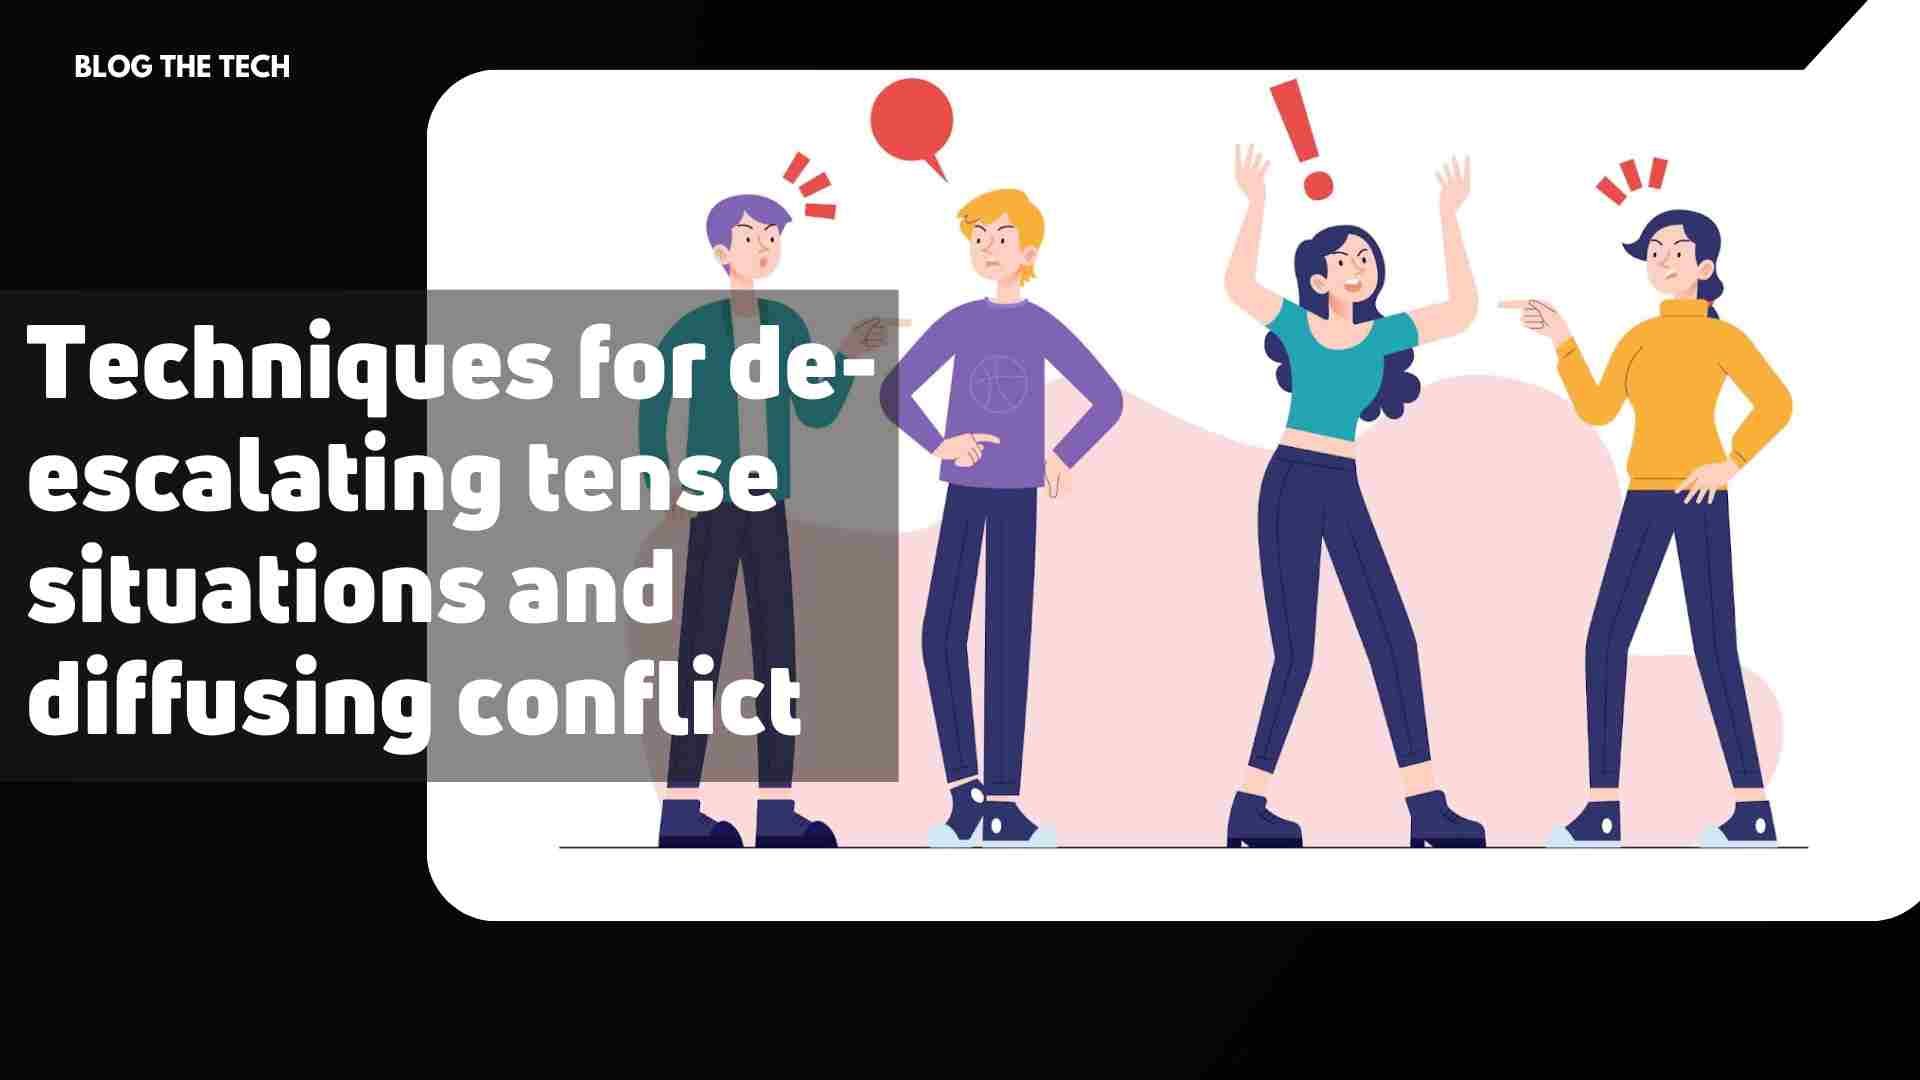 Techniques for de-escalating tense situations and diffusing conflict